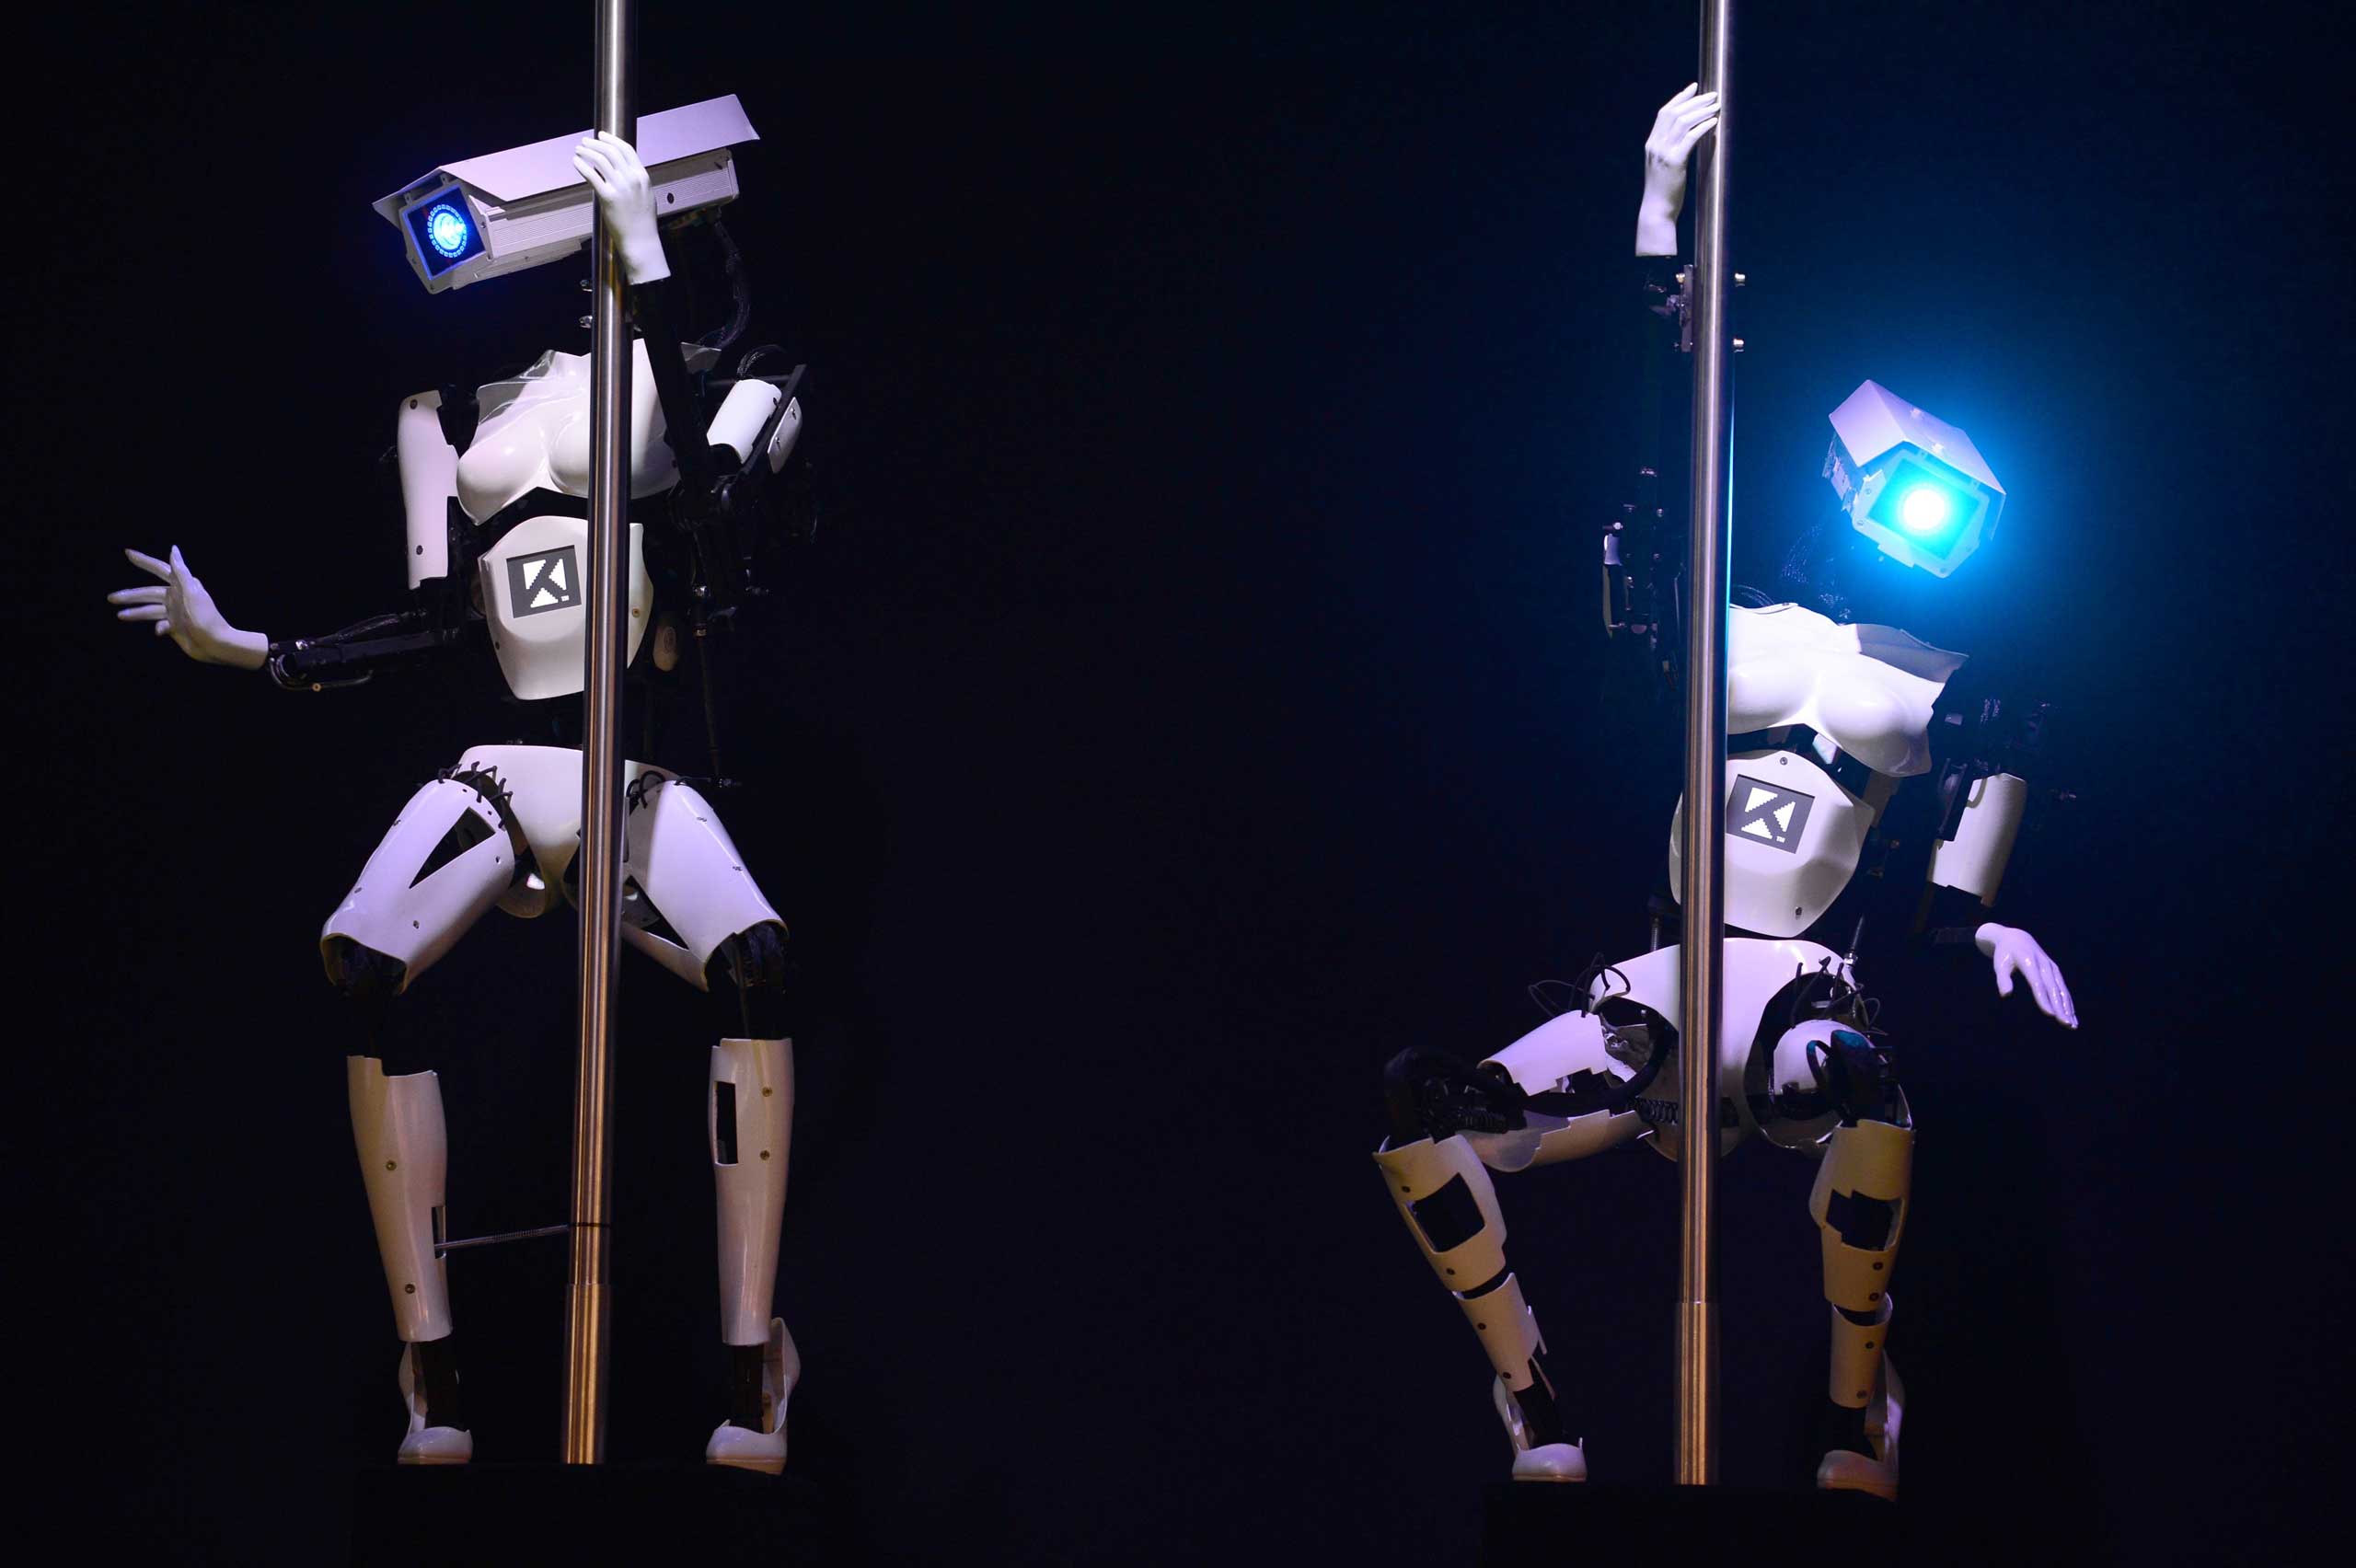 Robots perform a pole dance at a technology show booth occupied by the Tobit Software company, Germany March 9, 2014.